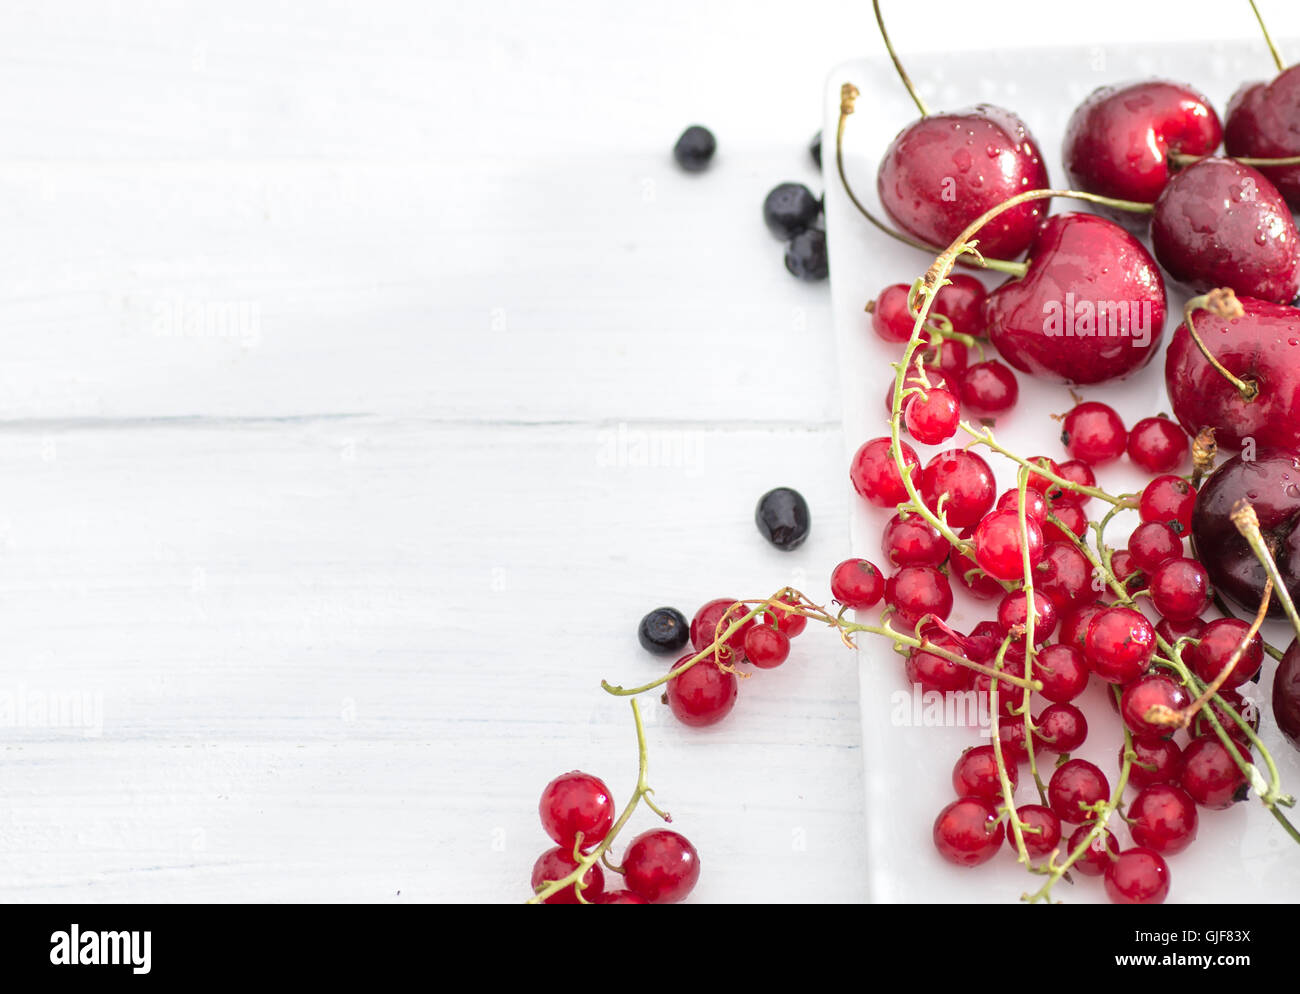 Red currant and cherry top view Stock Photo